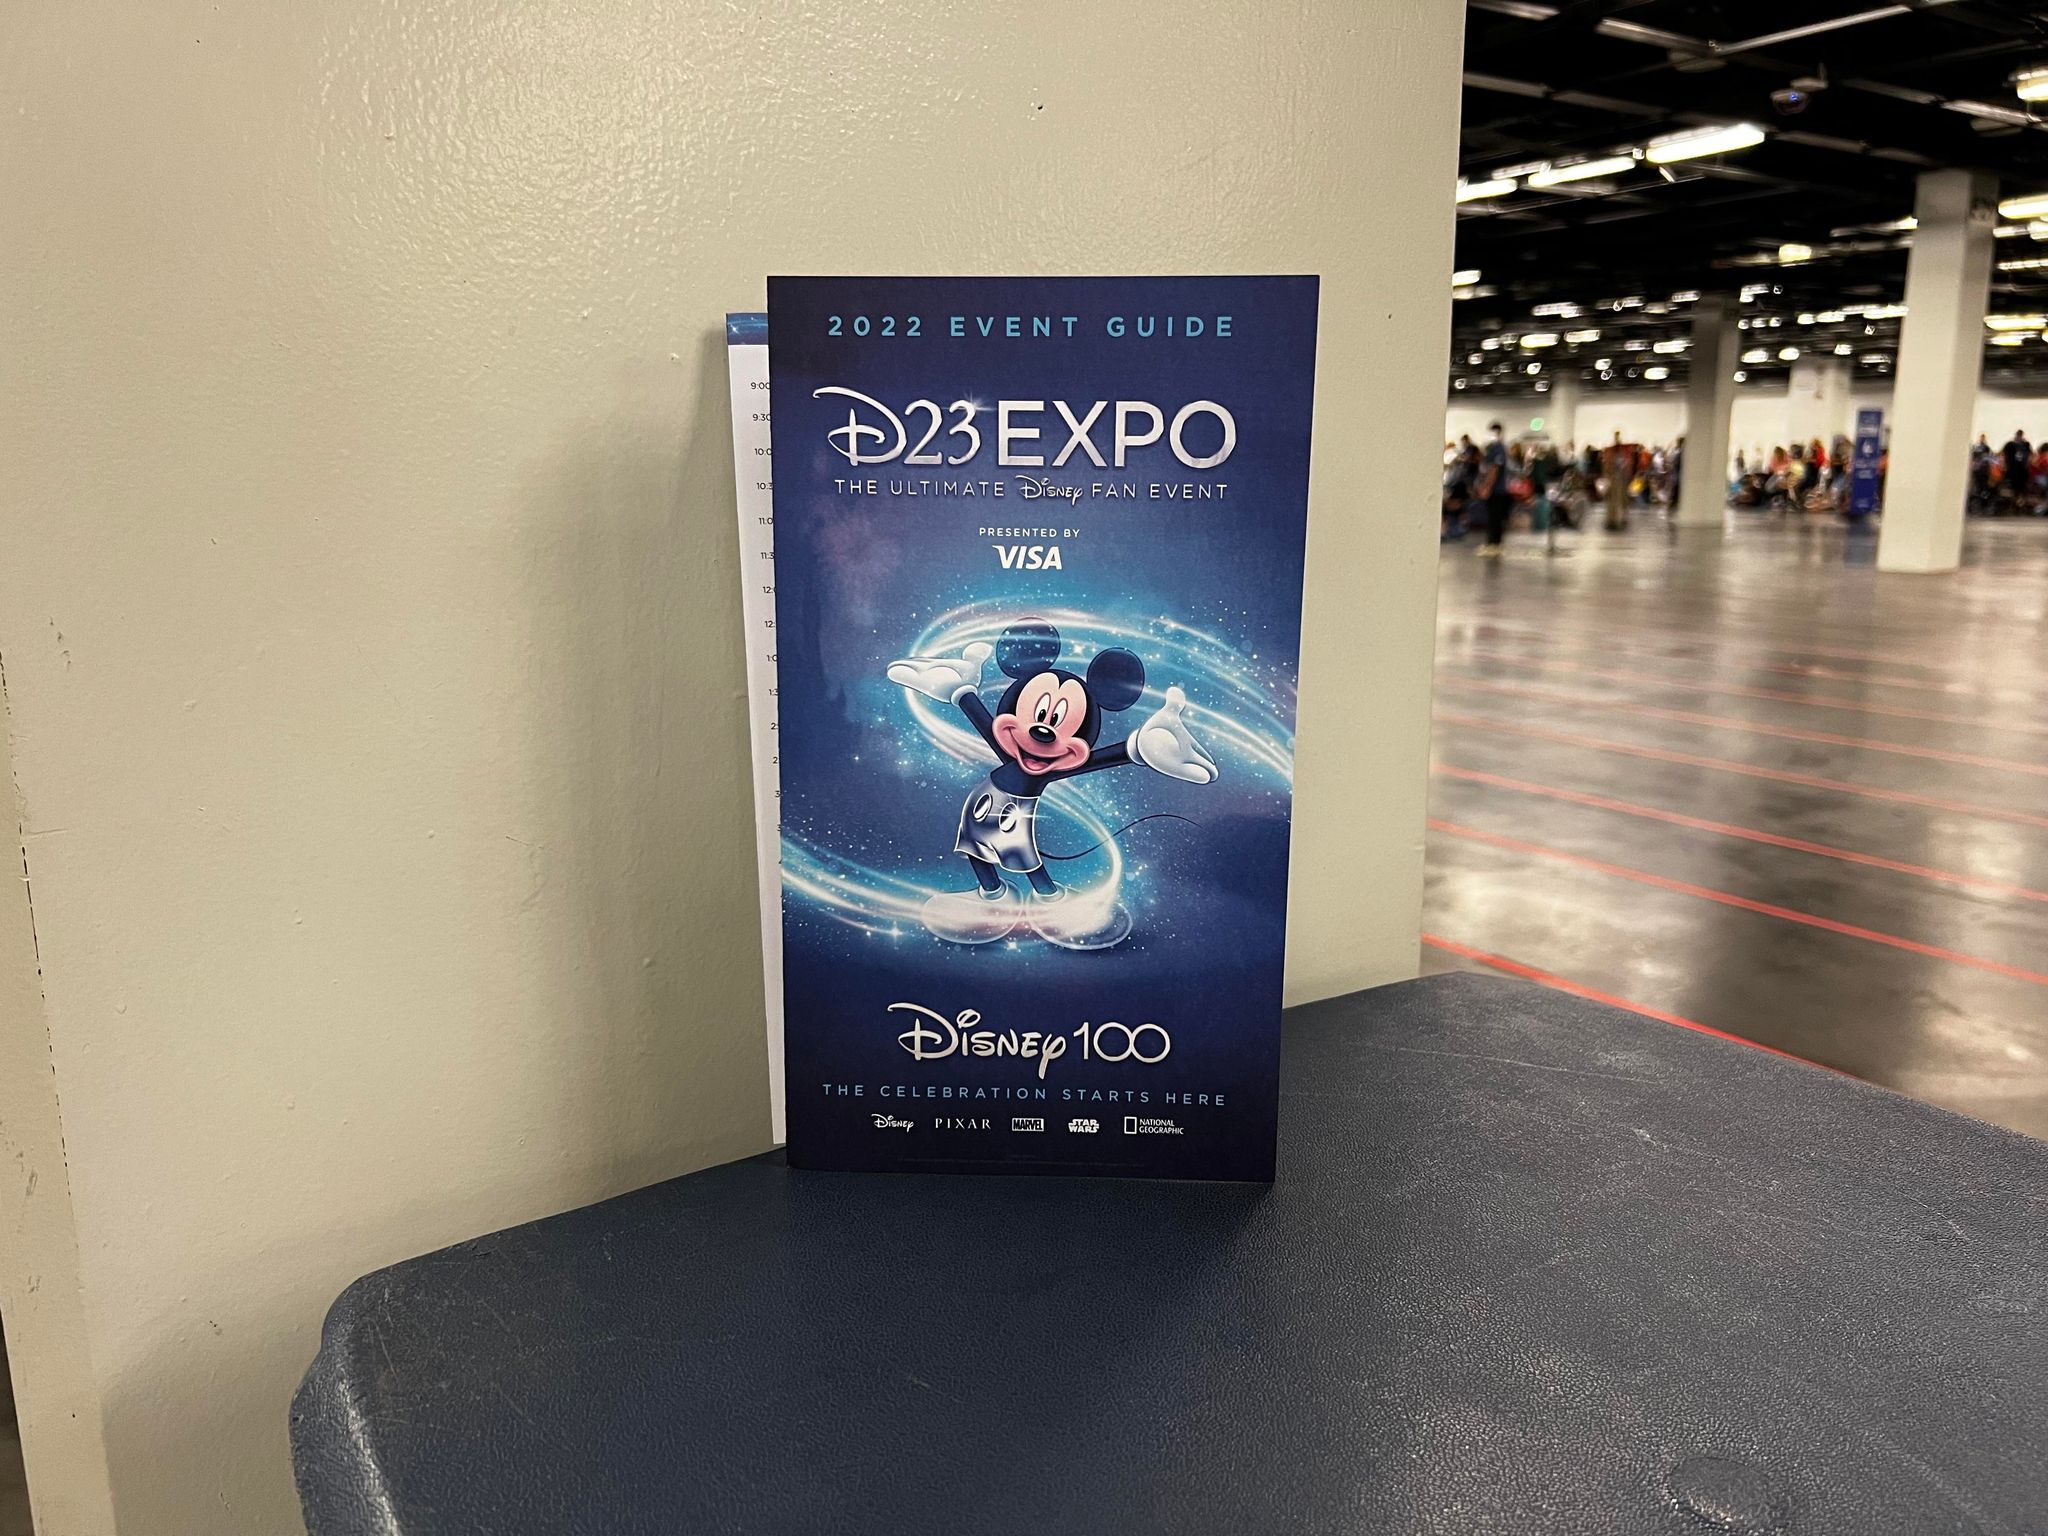 d23 expo map guidebook